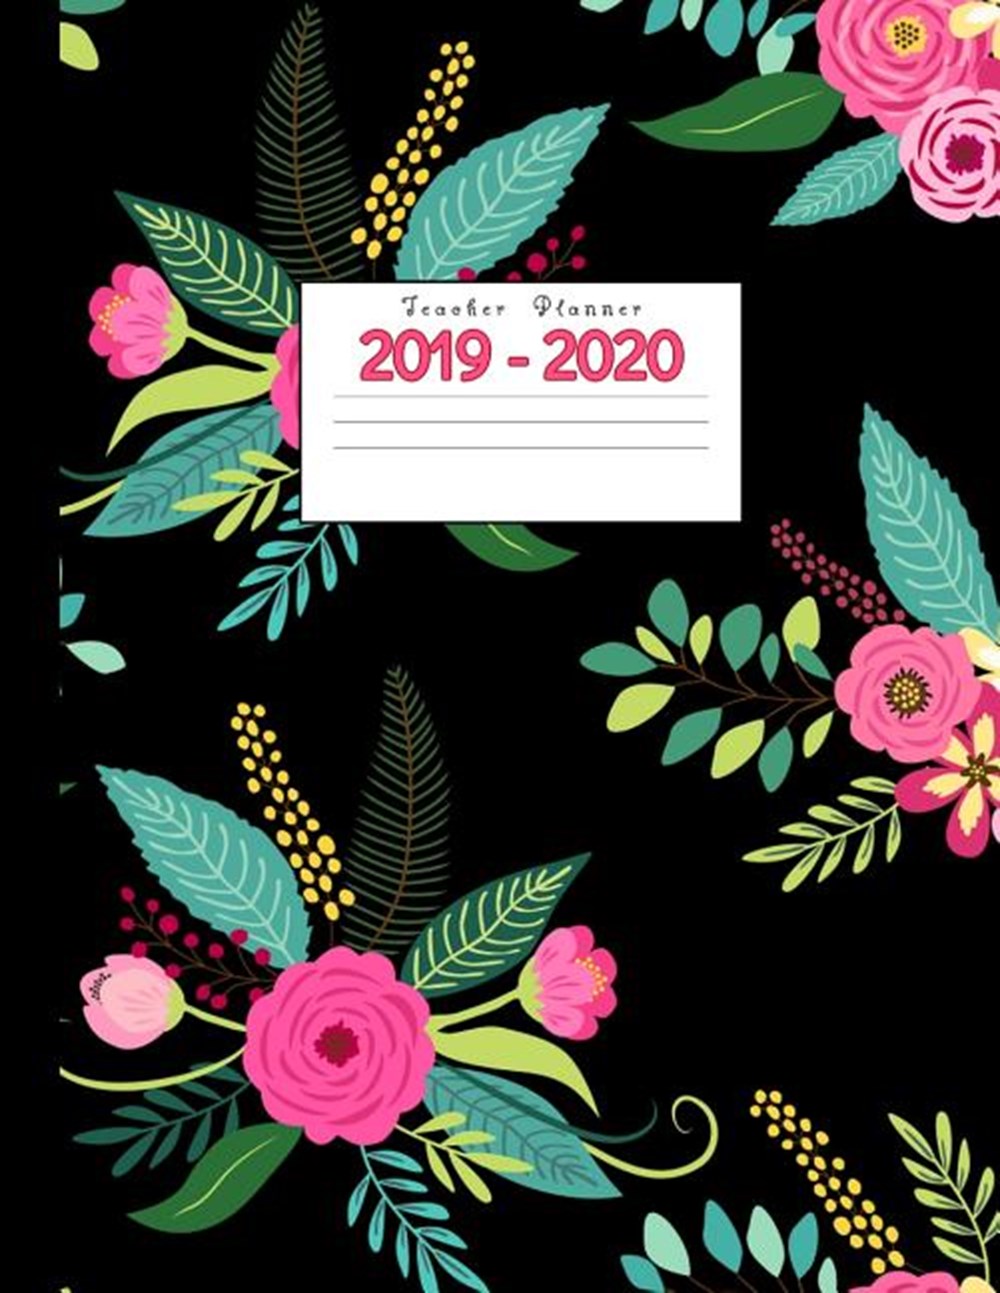 Teacher Planner 2019-2020 Academic Planners Calendar Daily, Weekly and Monthly July 2019- June 2020 